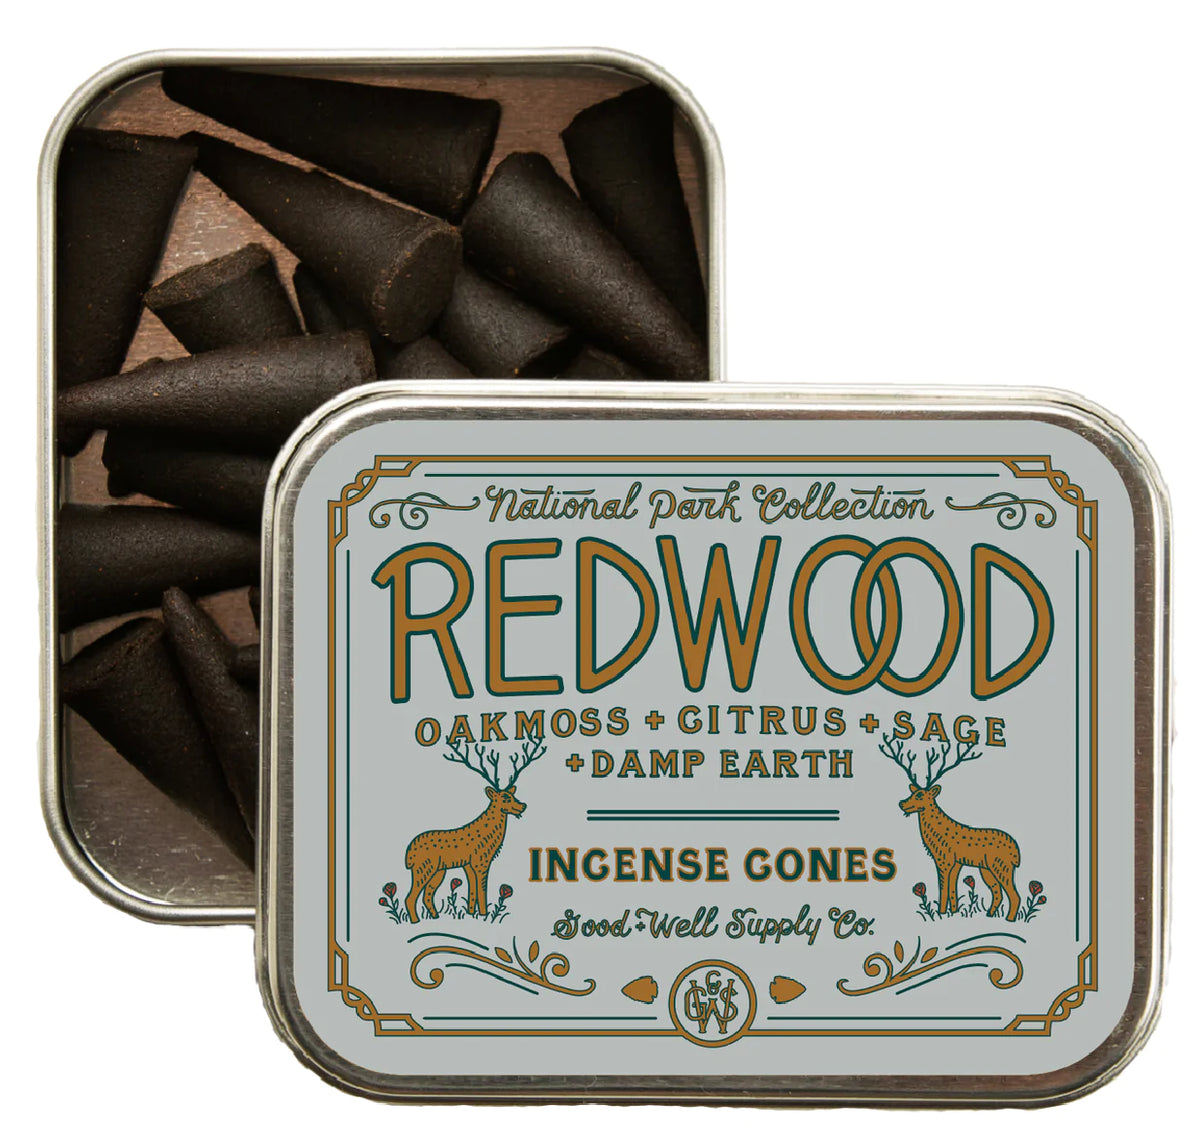 Good & Well Supply Co Redwood Incense